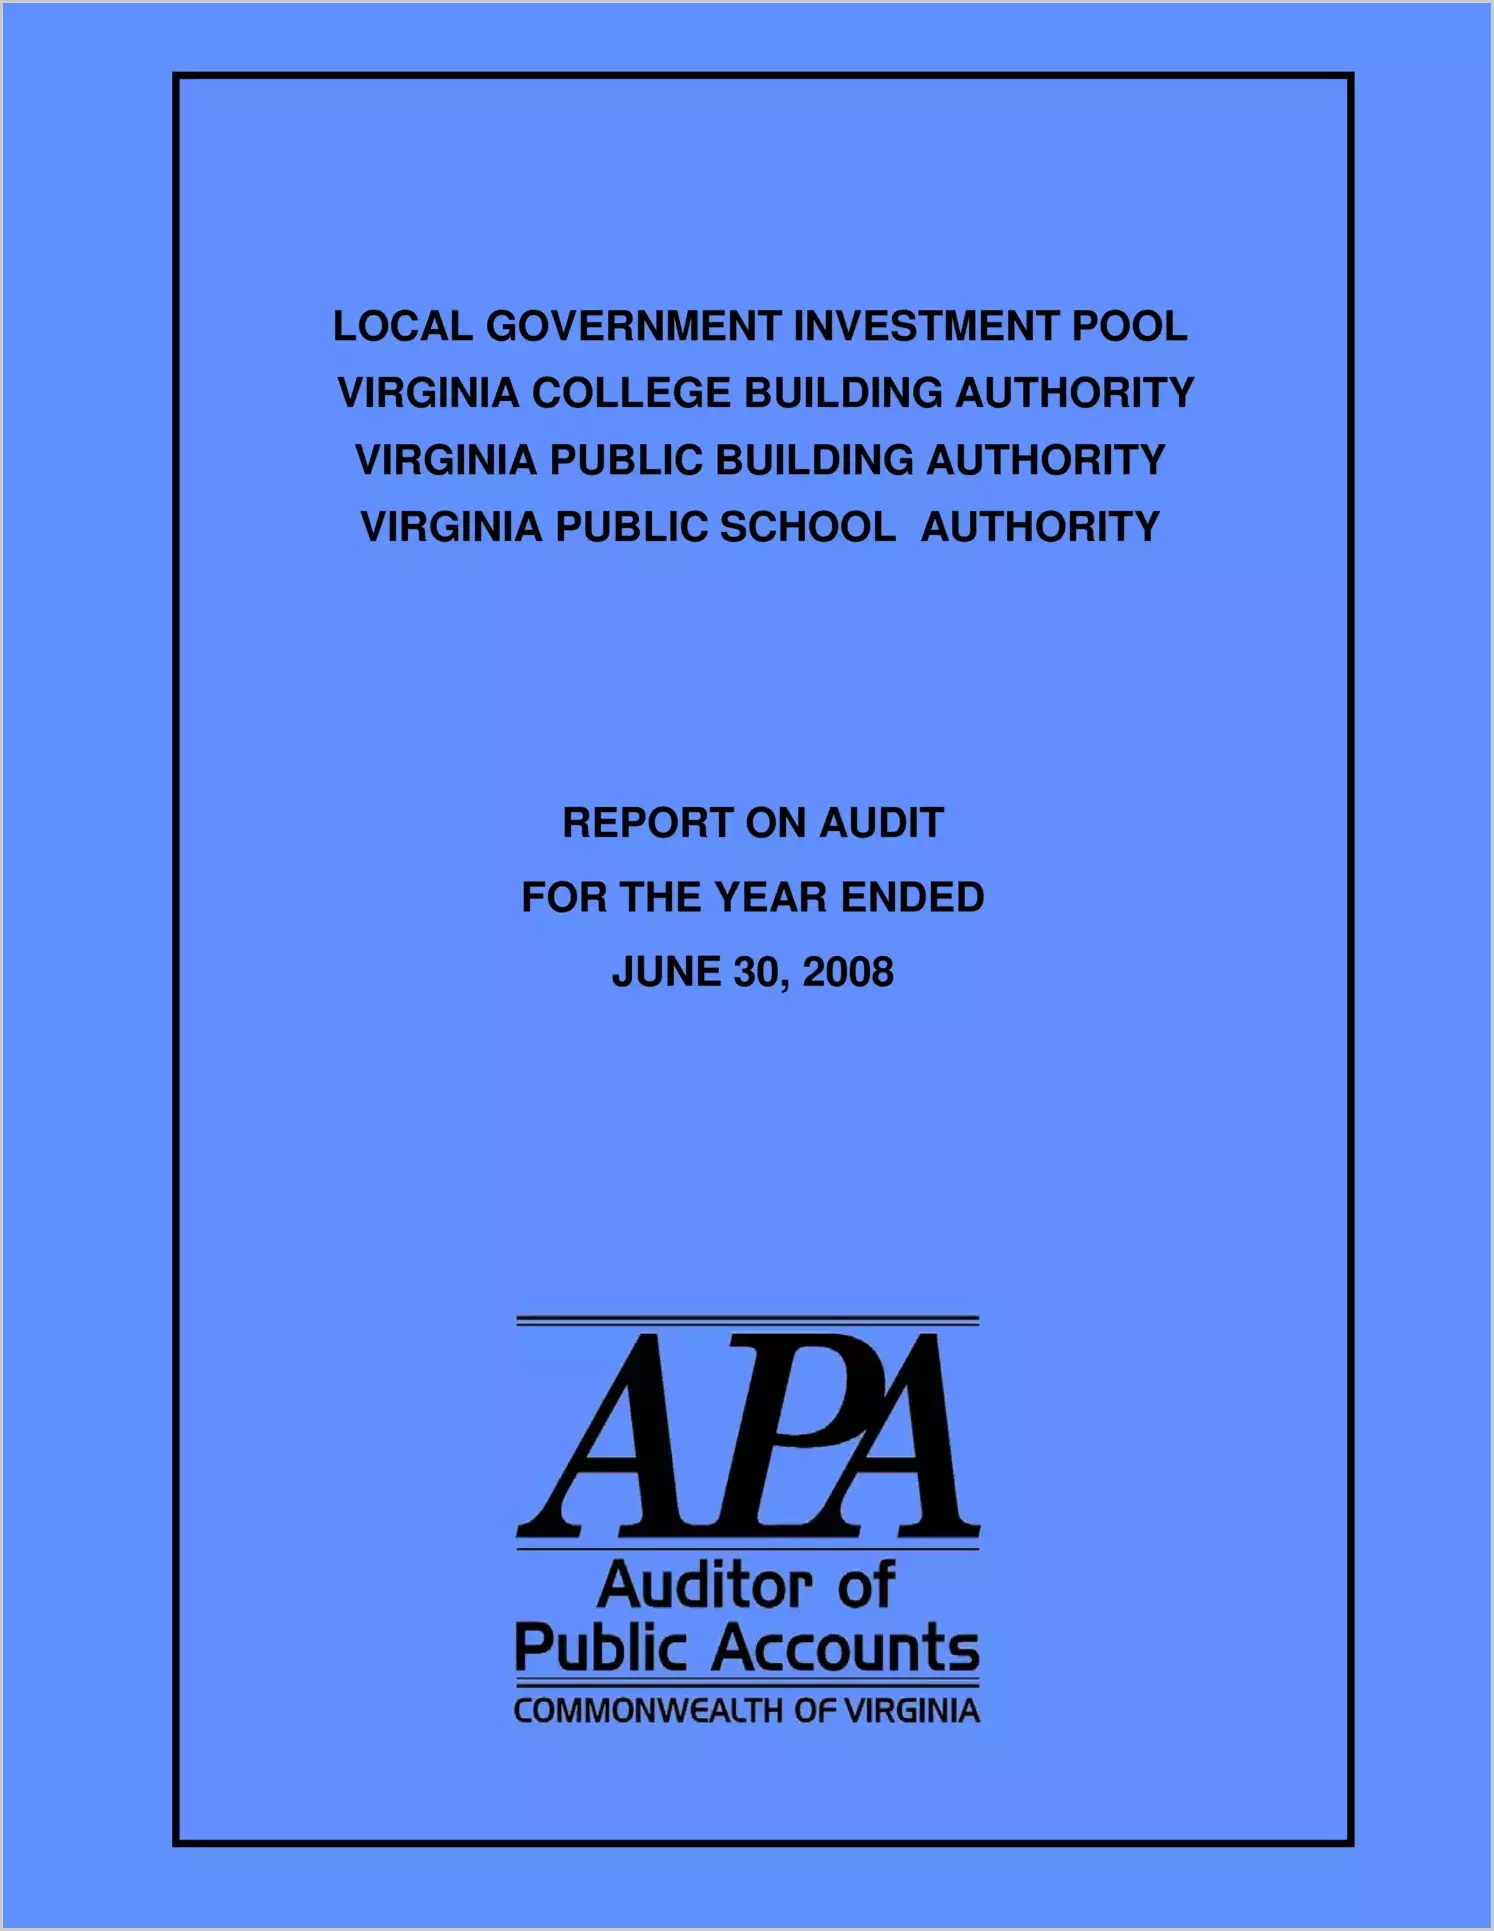 Local Government Investment Pool, Virginia College Building Authority, Virginia Public Building Authority, Virginia Public School Authority for the year ended June 30, 2008